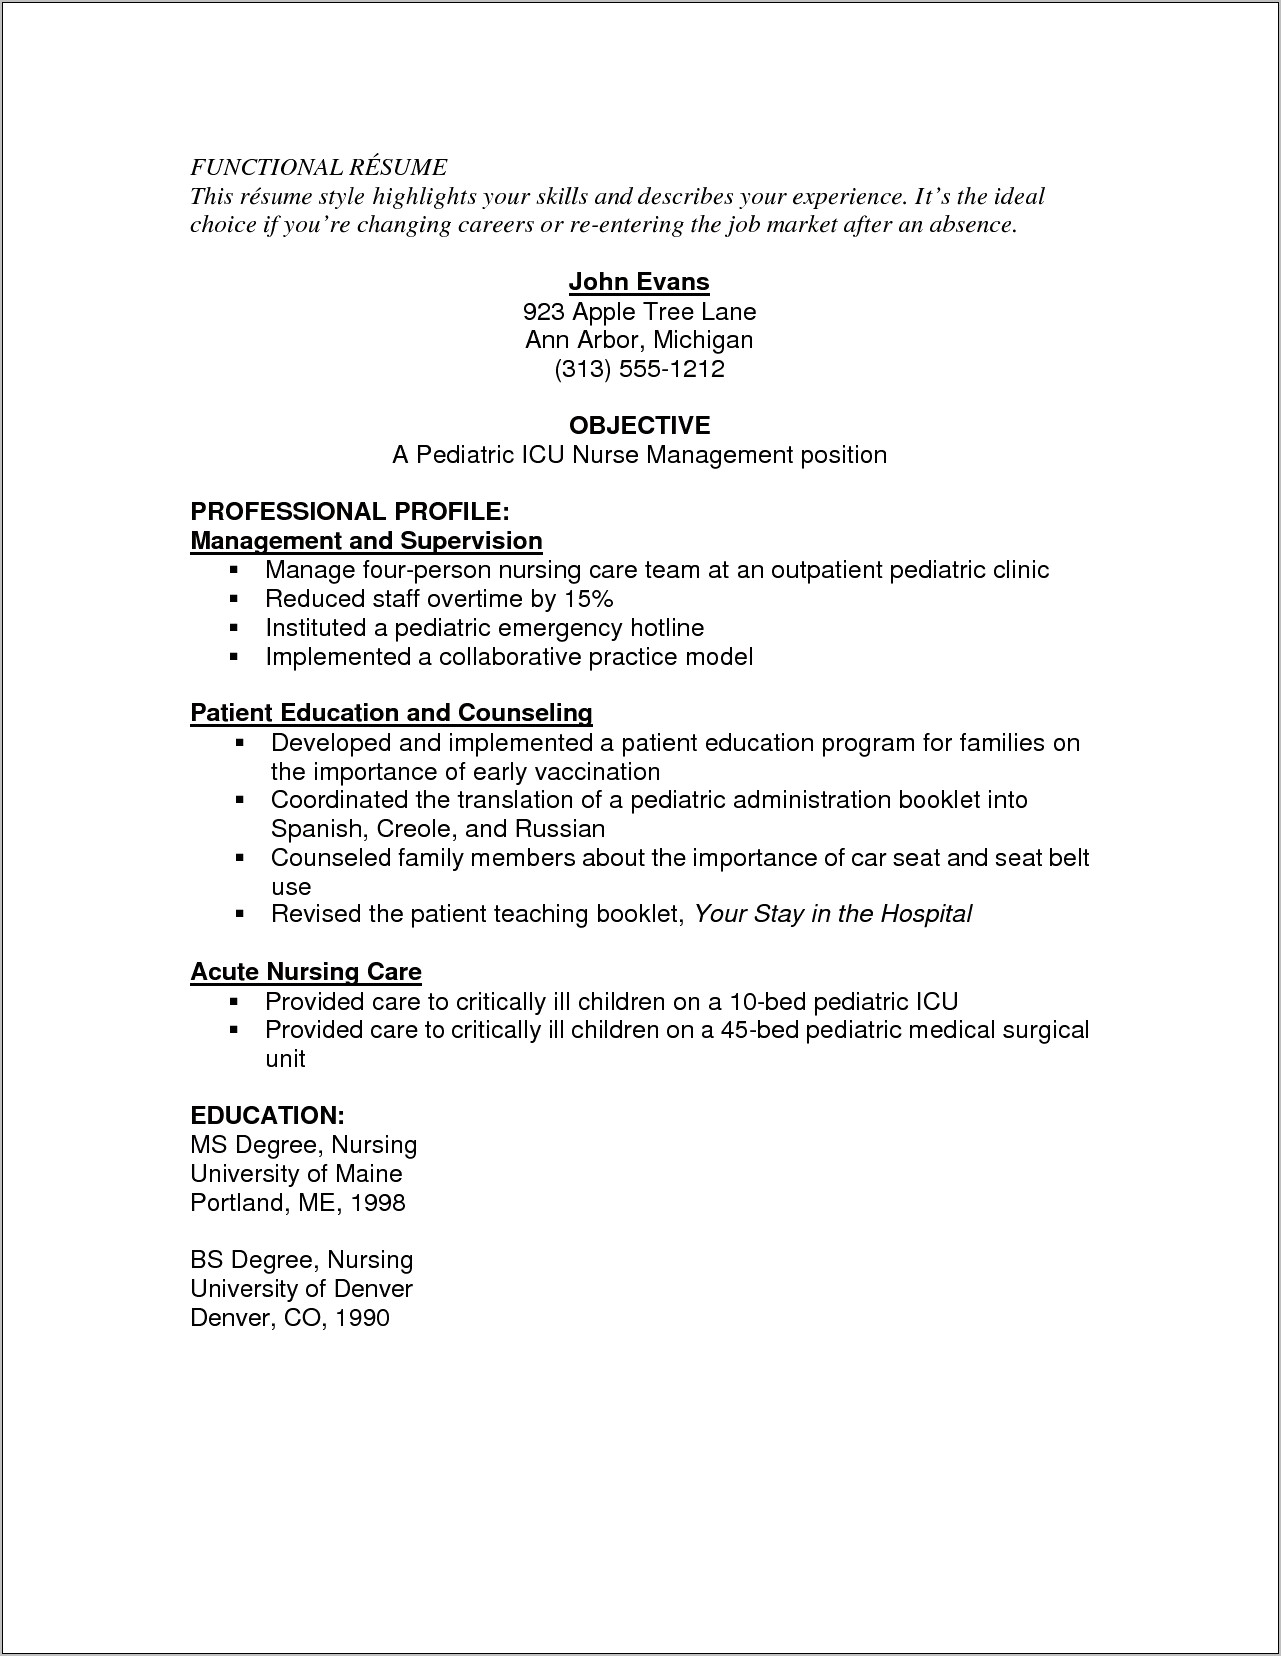 Sample Resume And Cover Letter For Pediatrician